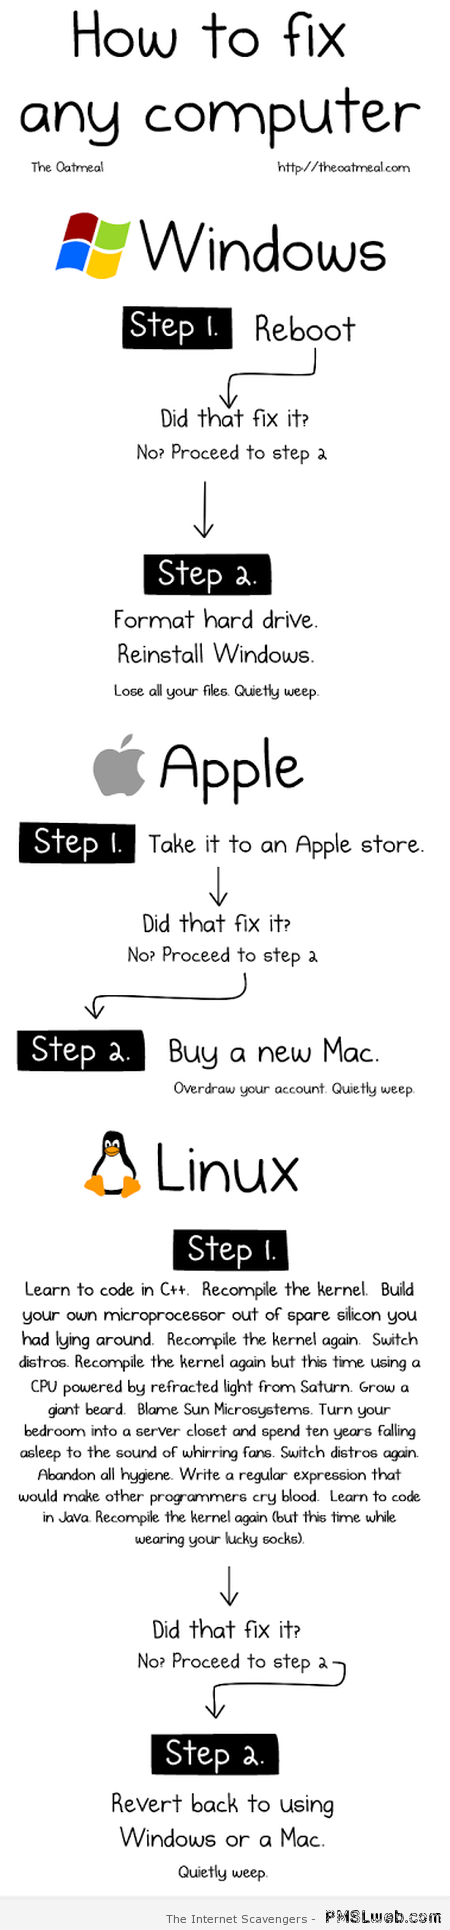 How to fix any computer funny at PMSLweb.com